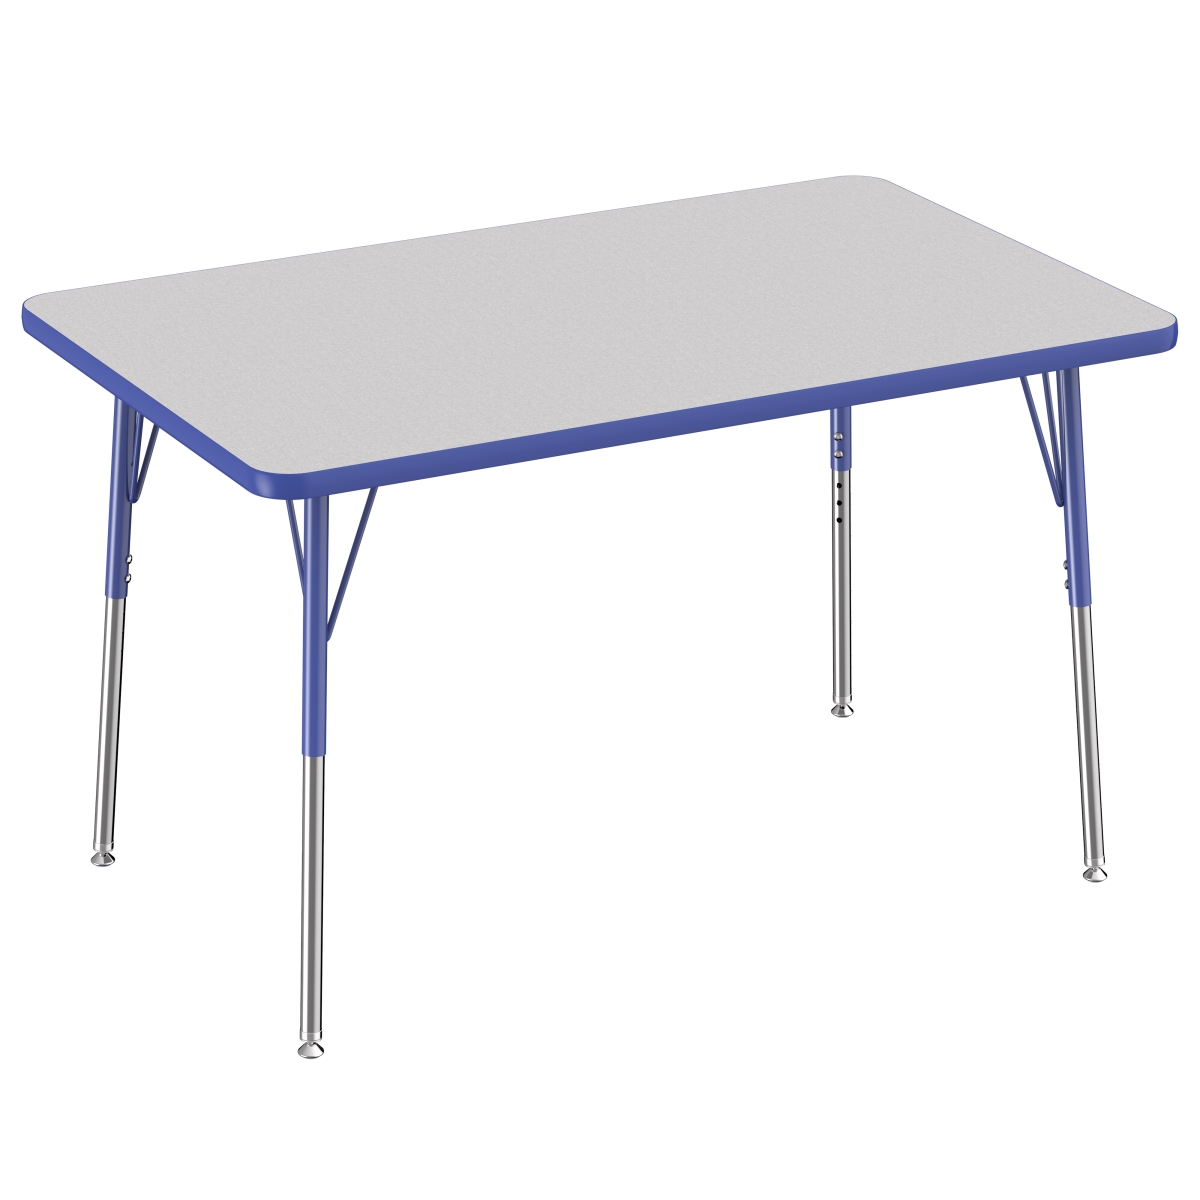 10019-gybl 30 X 48 In. Rectangle T-mold Adjustable Activity Table With Standard Swivel - Grey & Blue